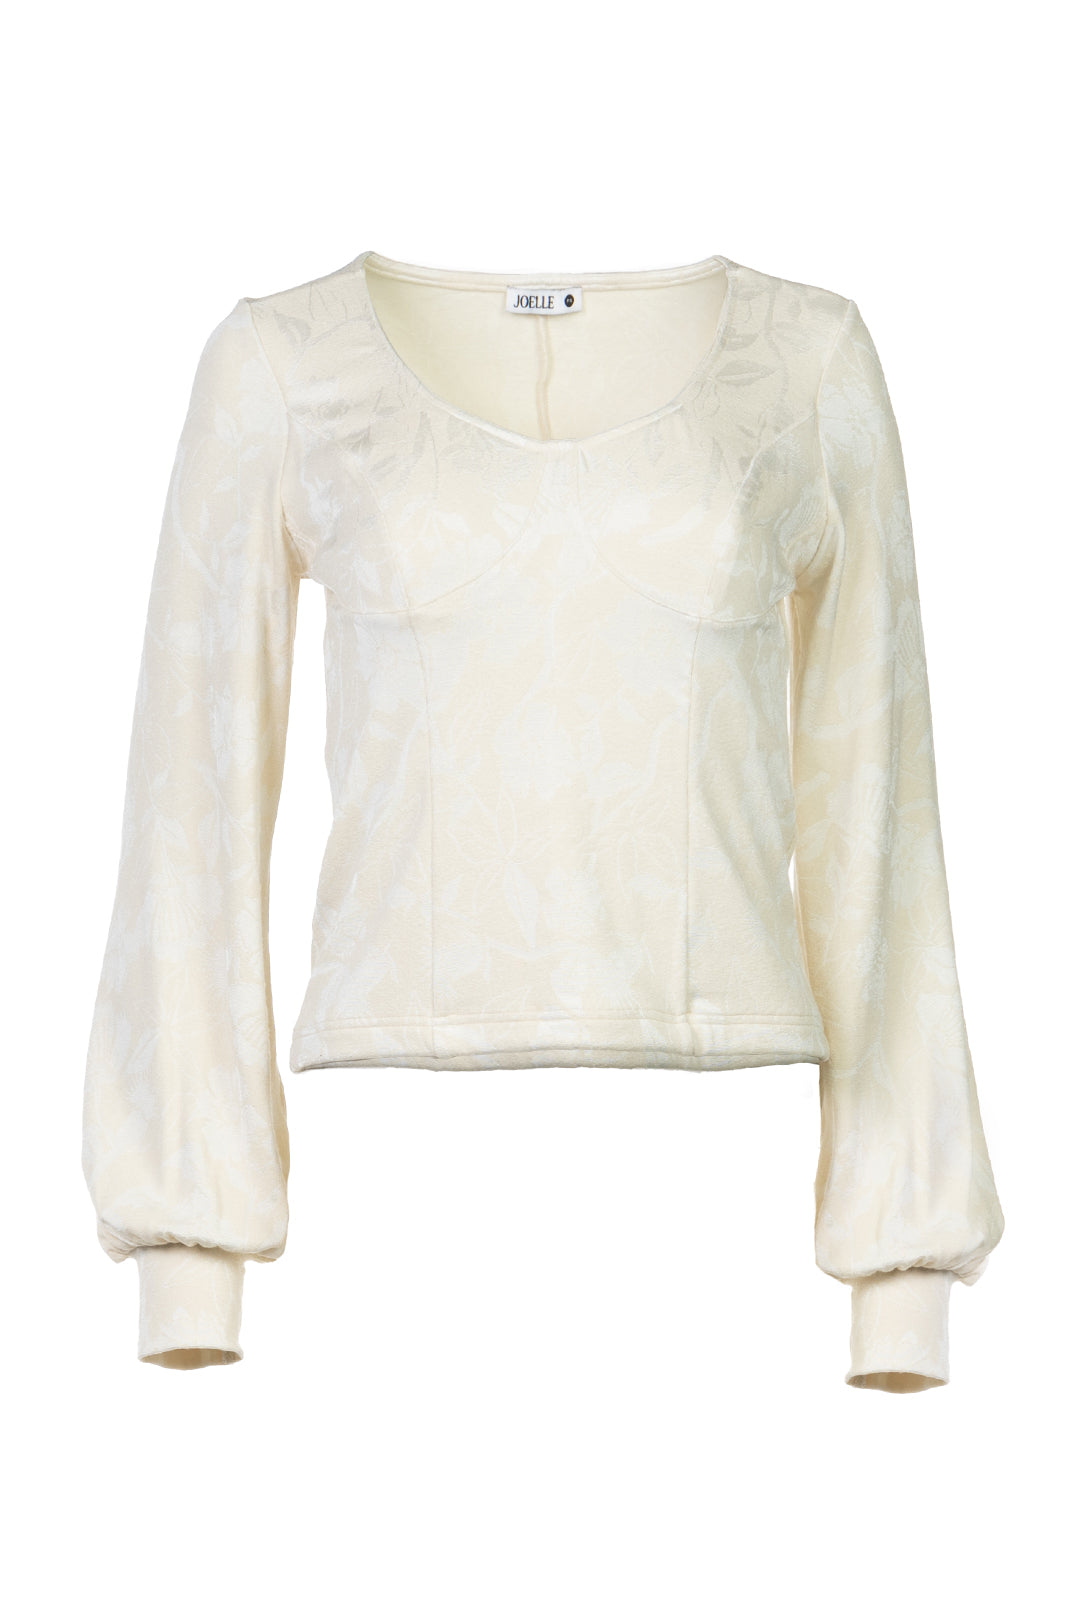 Cream corset sweater with floral patterns | Sandy